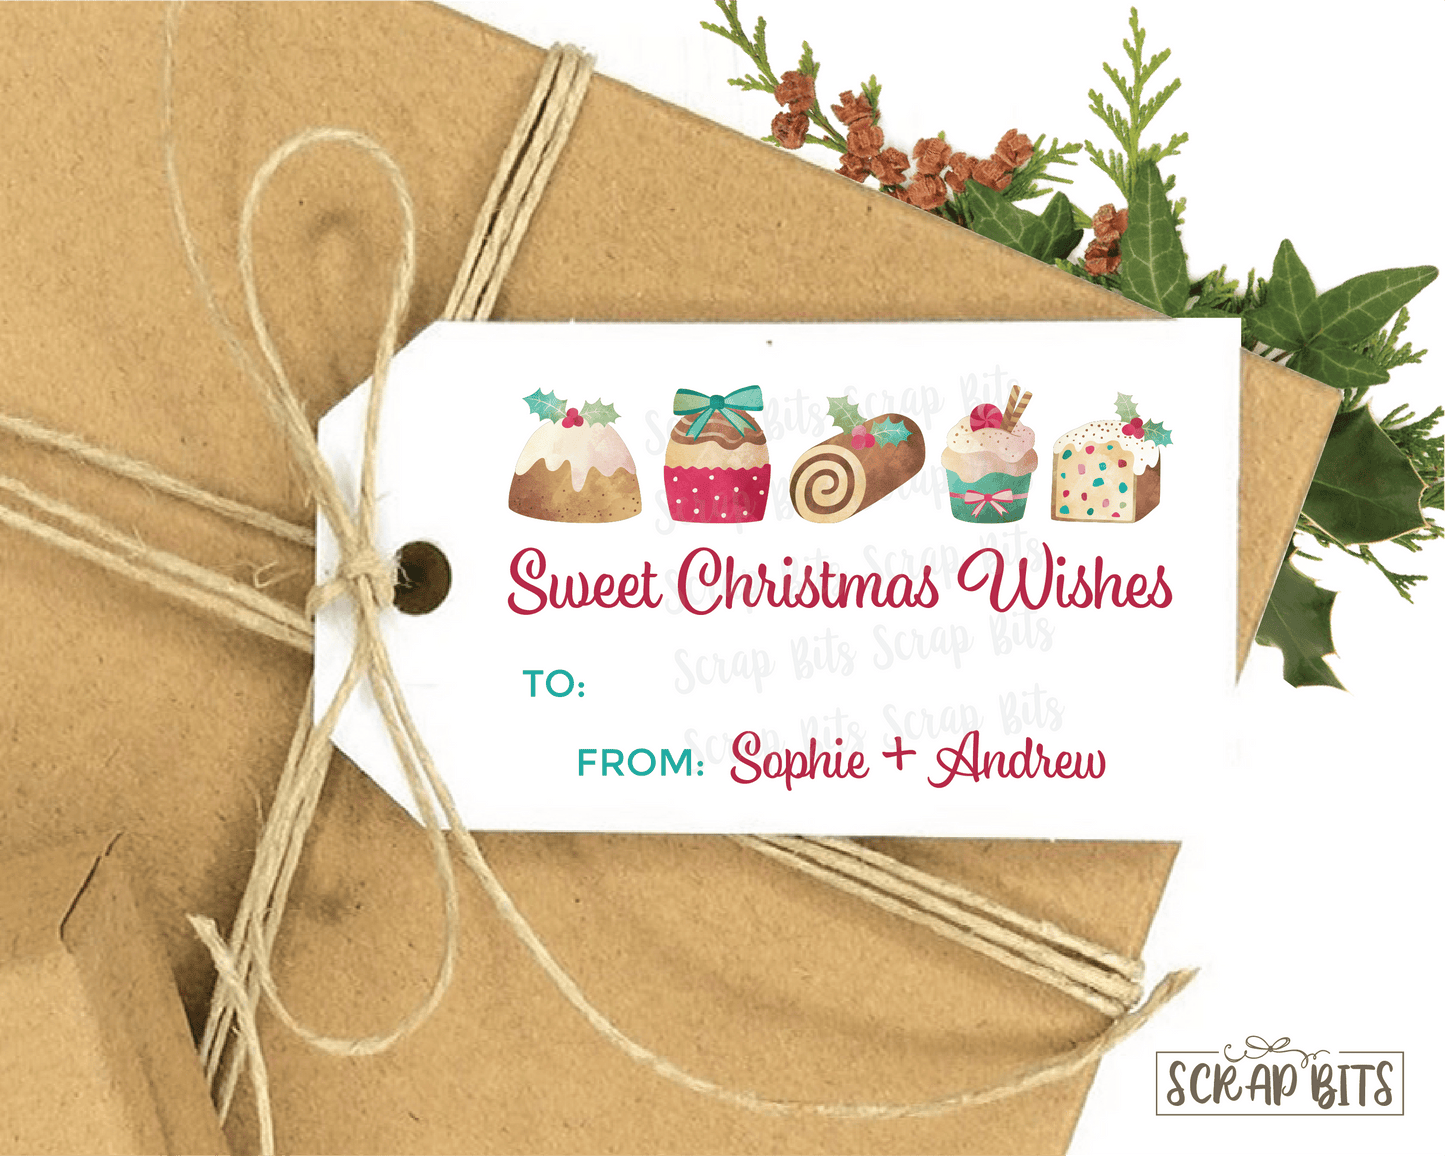 Sweet Christmas Wishes Tag . Personalized Christmas Gift Tags - Scrap Bits